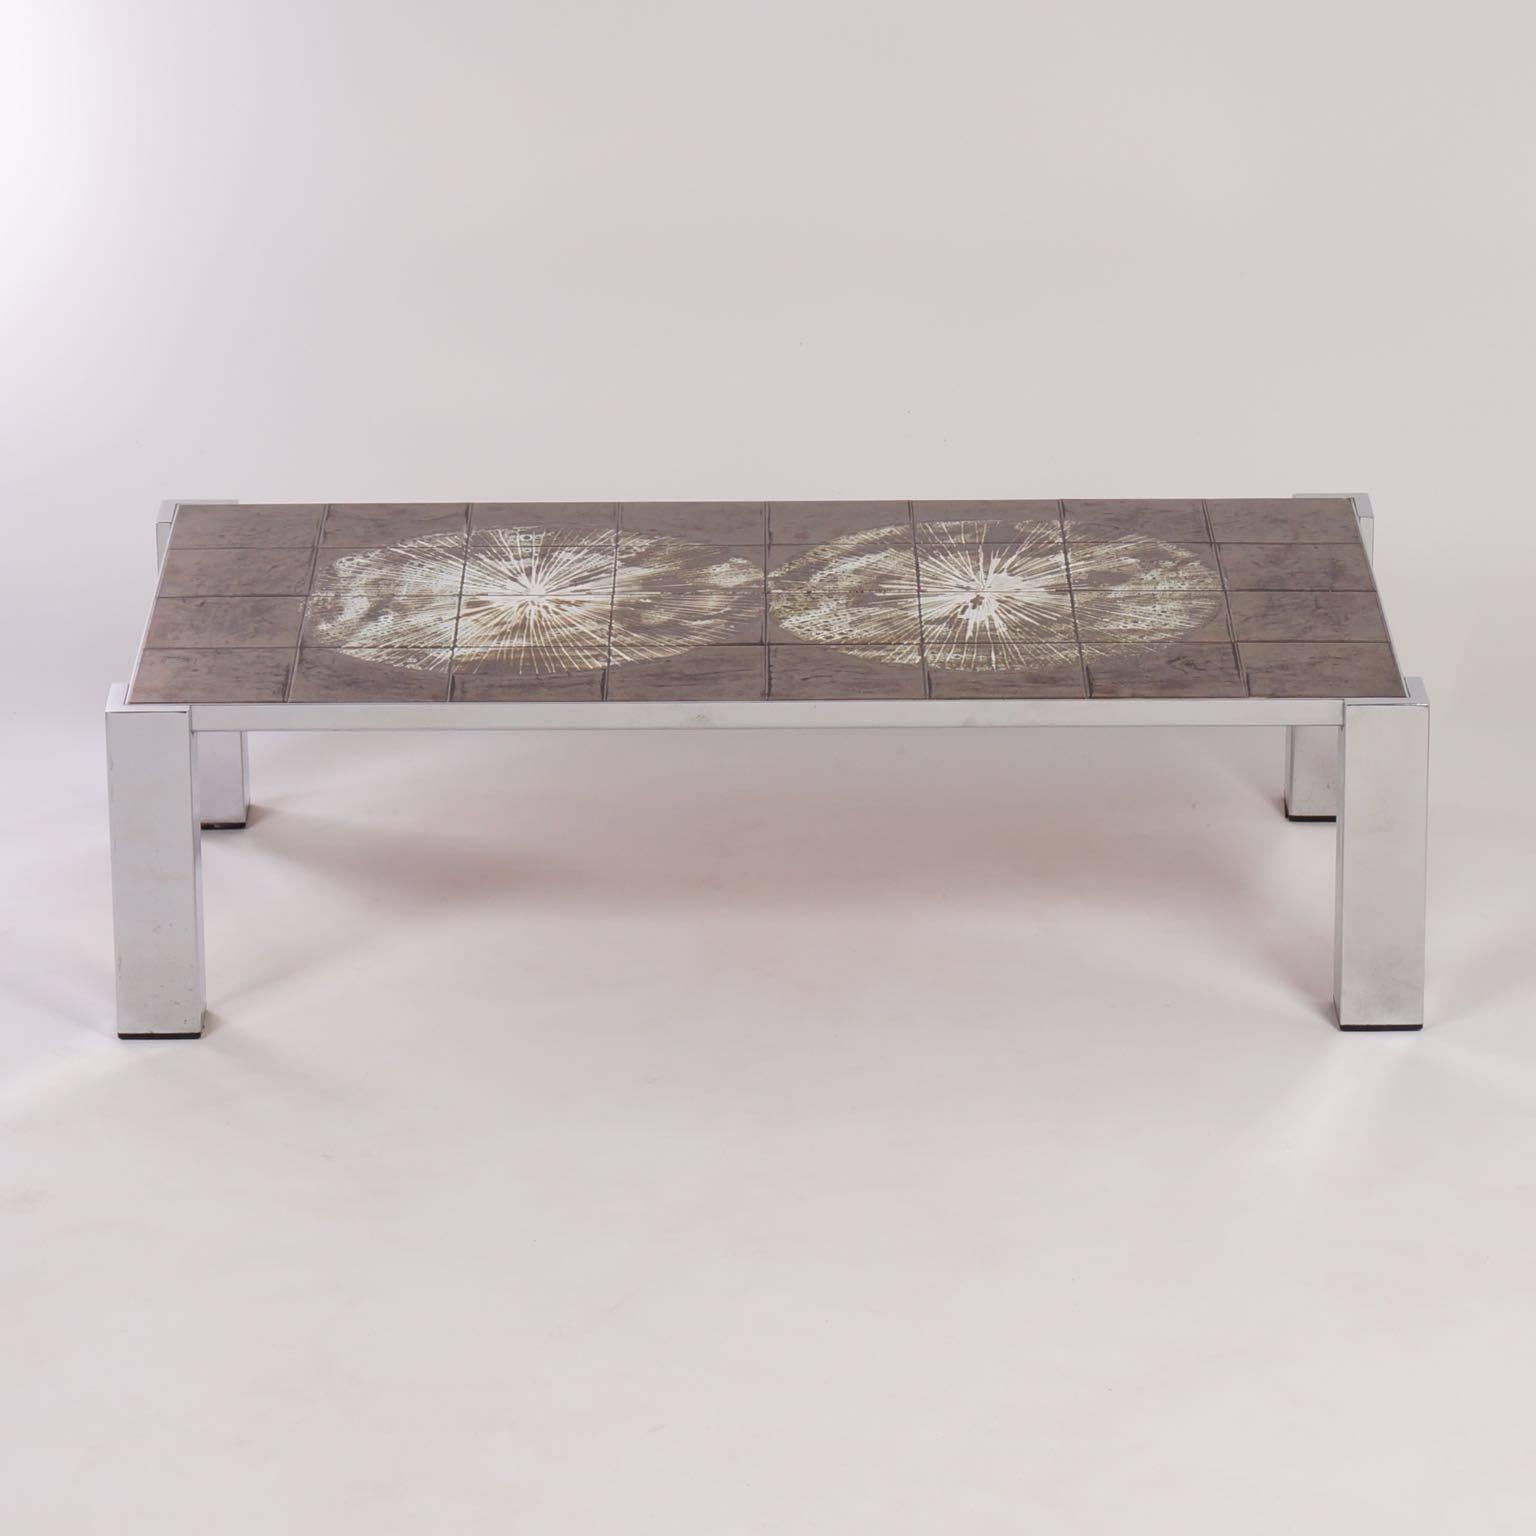 Hand-painted tile coffee table by Belarti from the 1960s. The tabletop of is made of hand-painted ceramic tiles by J. Belarti with colored enamel. Materials: chrome and earthenware tiles. Measurements: H x W x D = 34 x 125 x 64.5 cm.
 